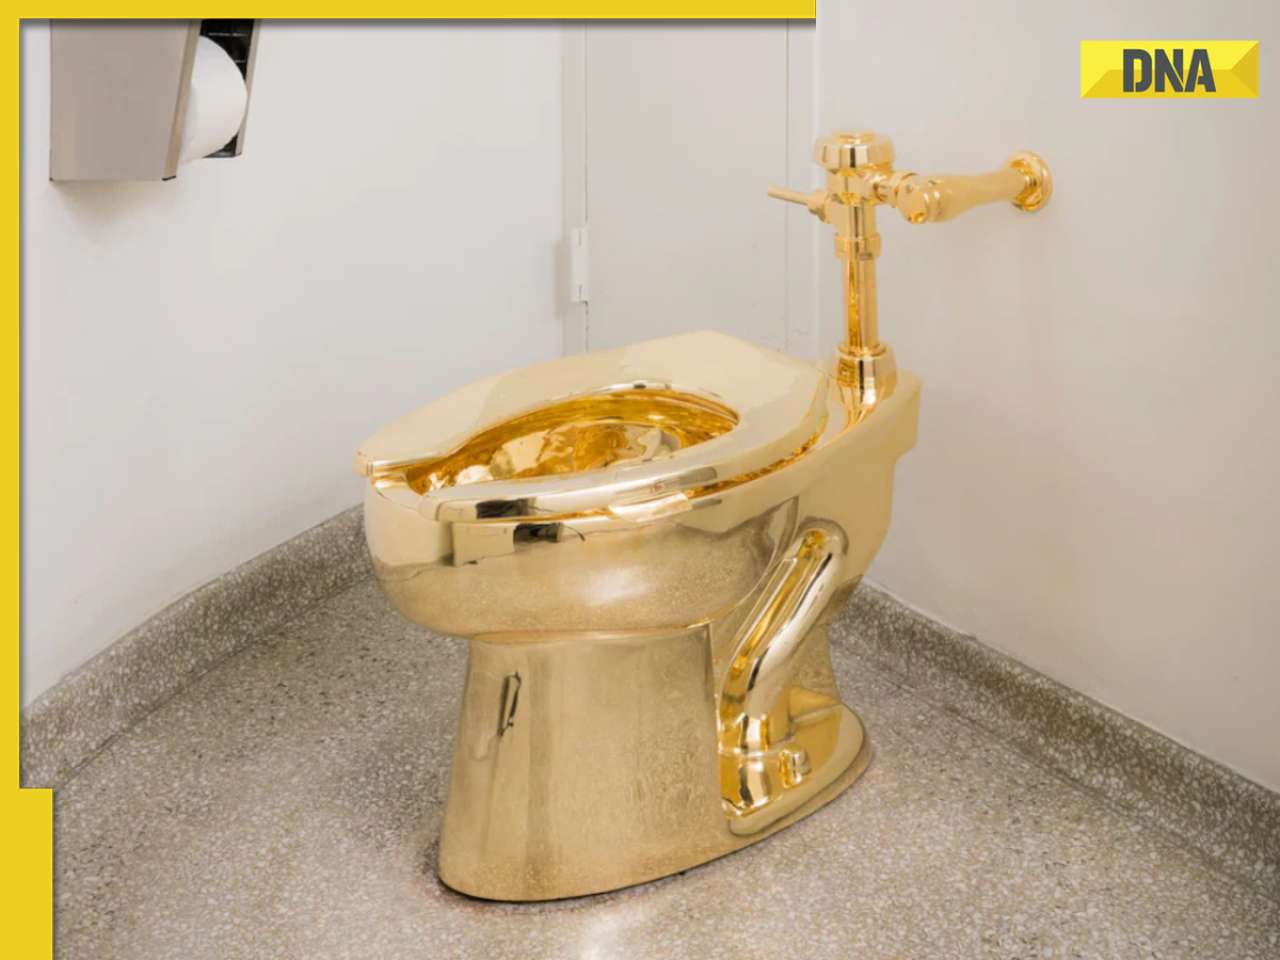 Man from UK pleads guilty to theft of gold toilet worth Rs 50 crore, details inside